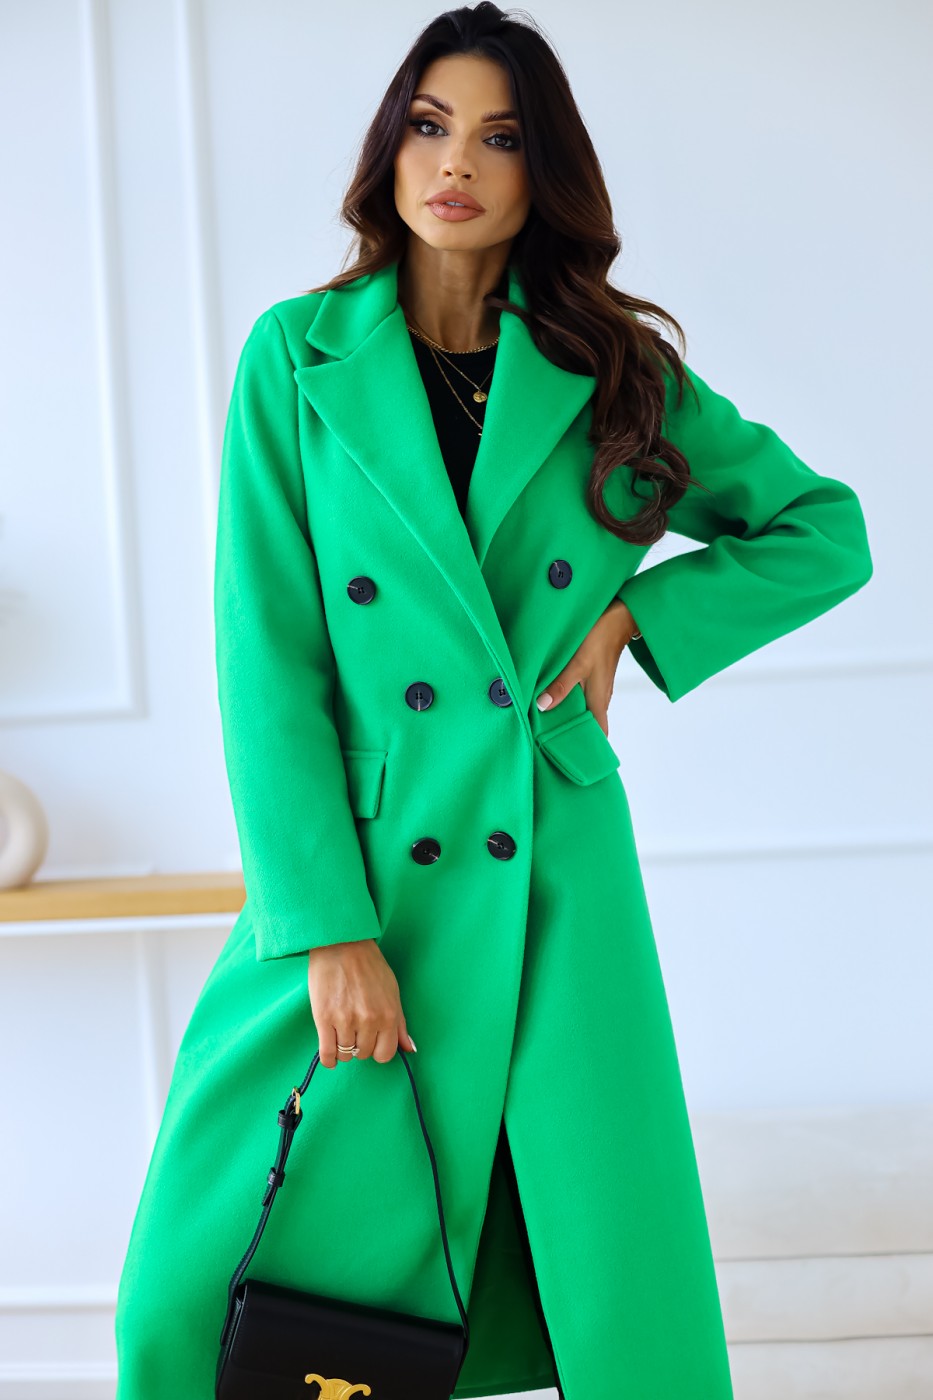 Trench Coat Outfit | Green Aesthetic, Blue Aesthetic Vibrant Colors Tr ...